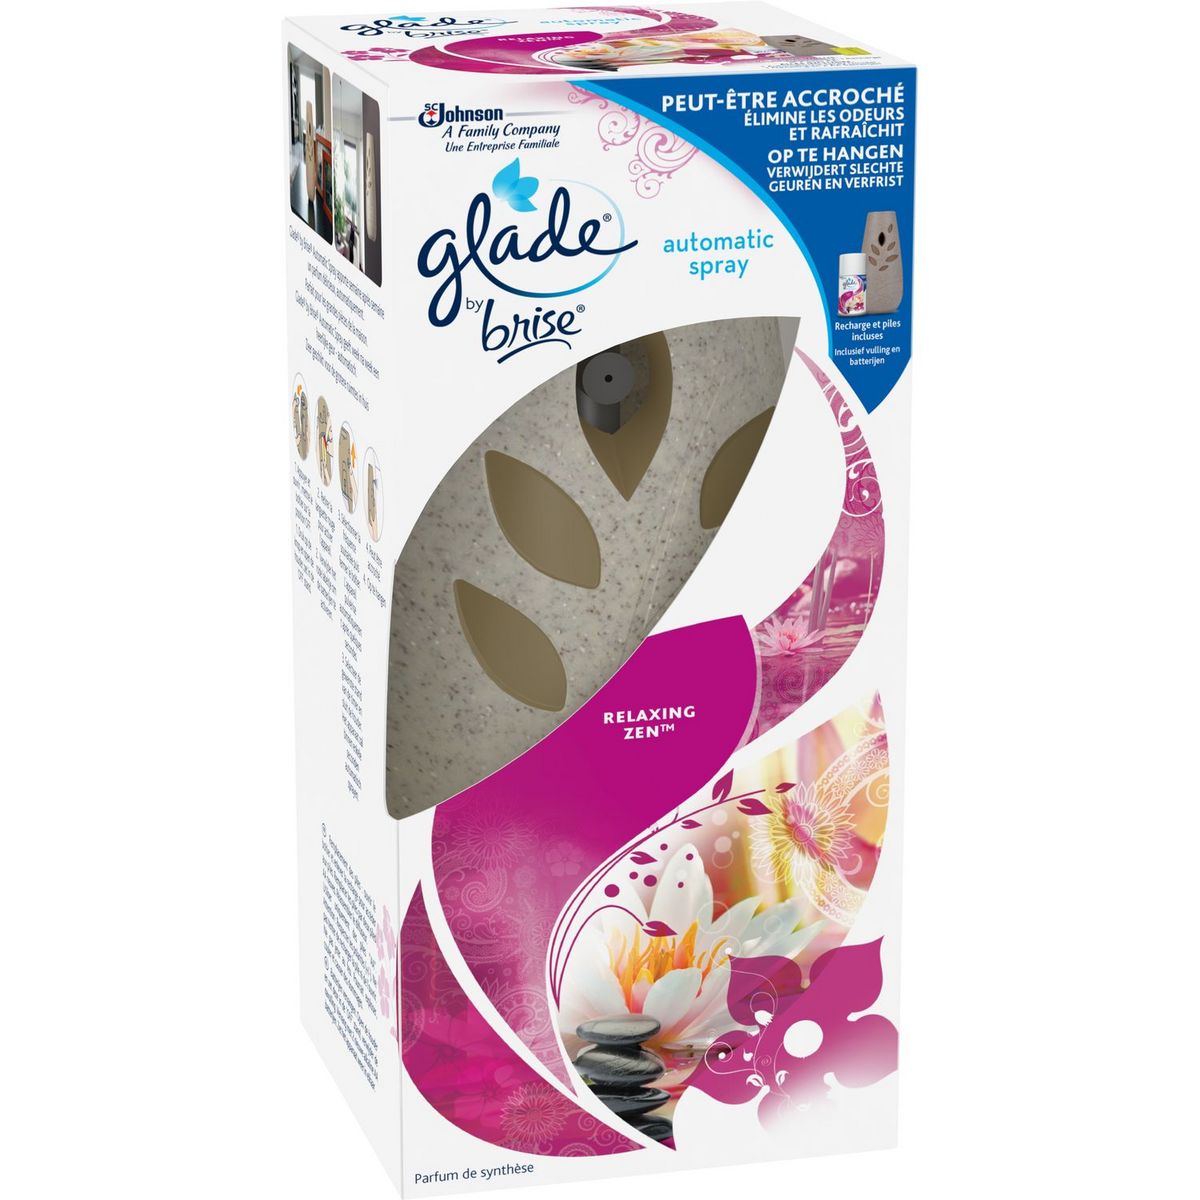 GLADE Glade diffuseur automatique spray relaxing zen + recharge pas cher 